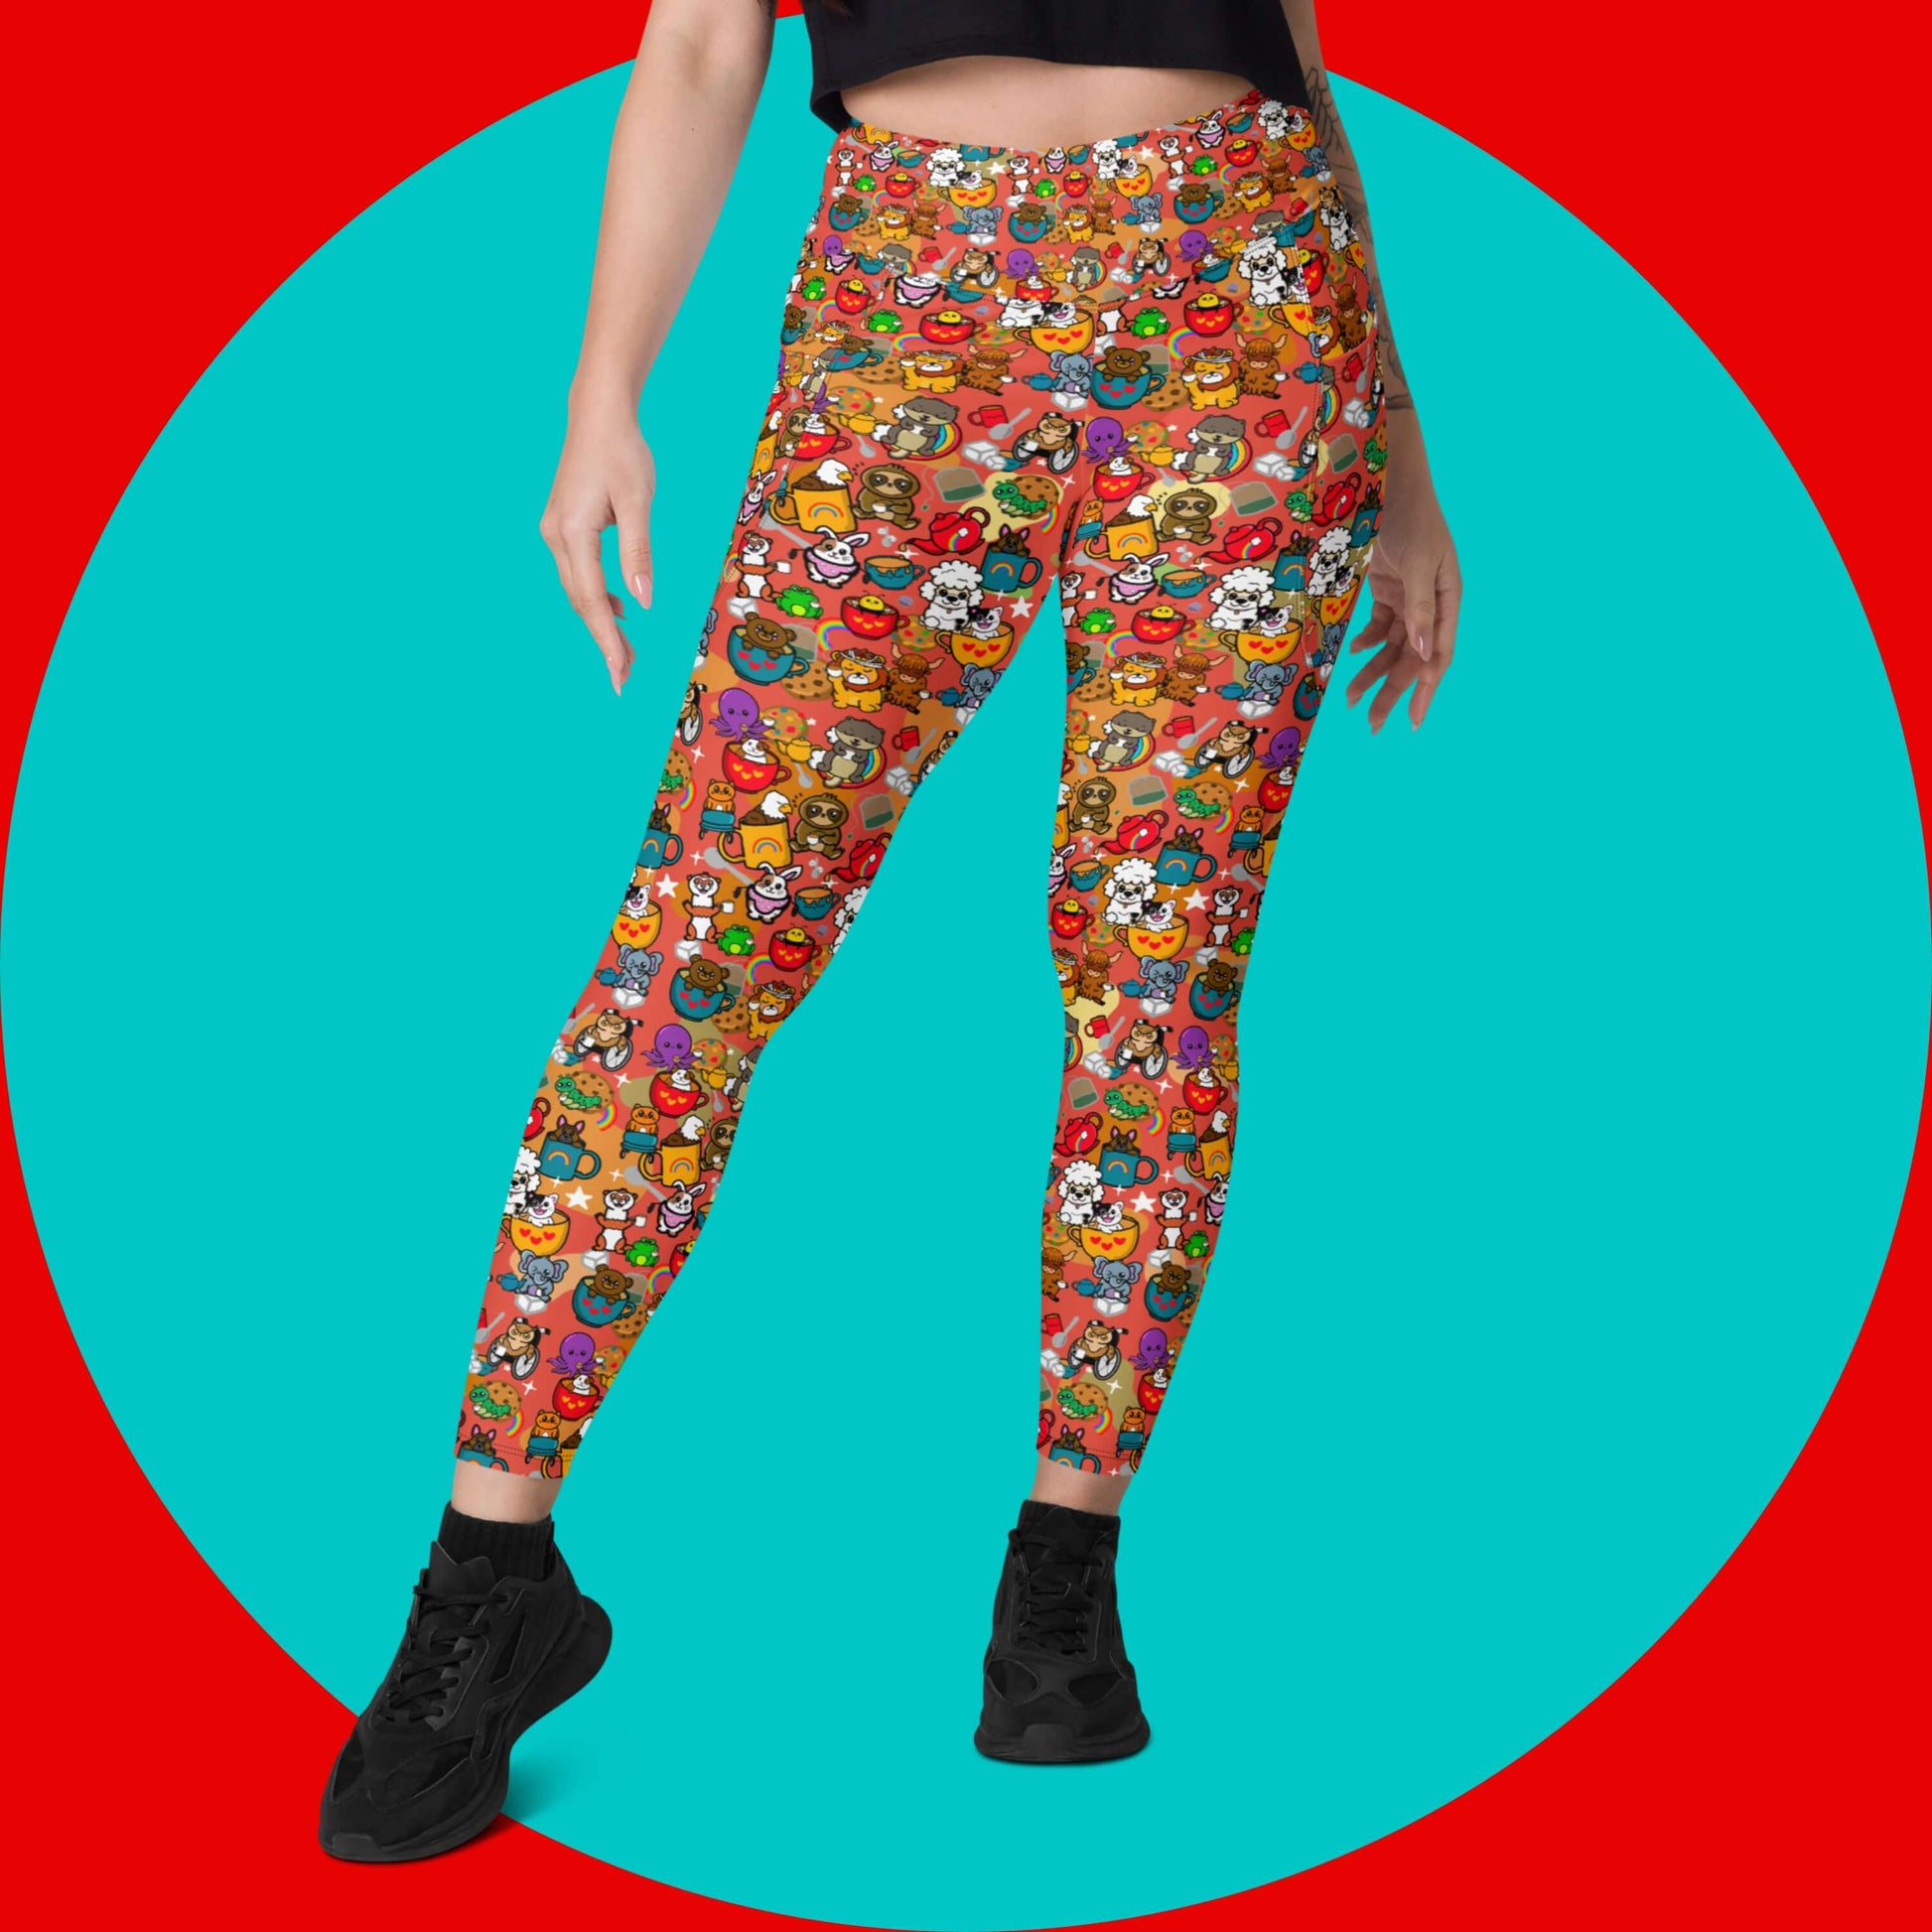 The Disabili Tea and Biscuits - Disability Leggings with pockets being modelled by a femme person wearing a black tee and black trainers on a red and blue background. The leggings feature various disabled and chronically ill animal characters drinking tea, sitting in tea mugs and holding up mugs. There is also various cookie biscuits, tea bags, sugar cubes, teapots, rainbows, sparkles and tea spills all underneath. The leggings are a punny gift raising awareness for disabilities.